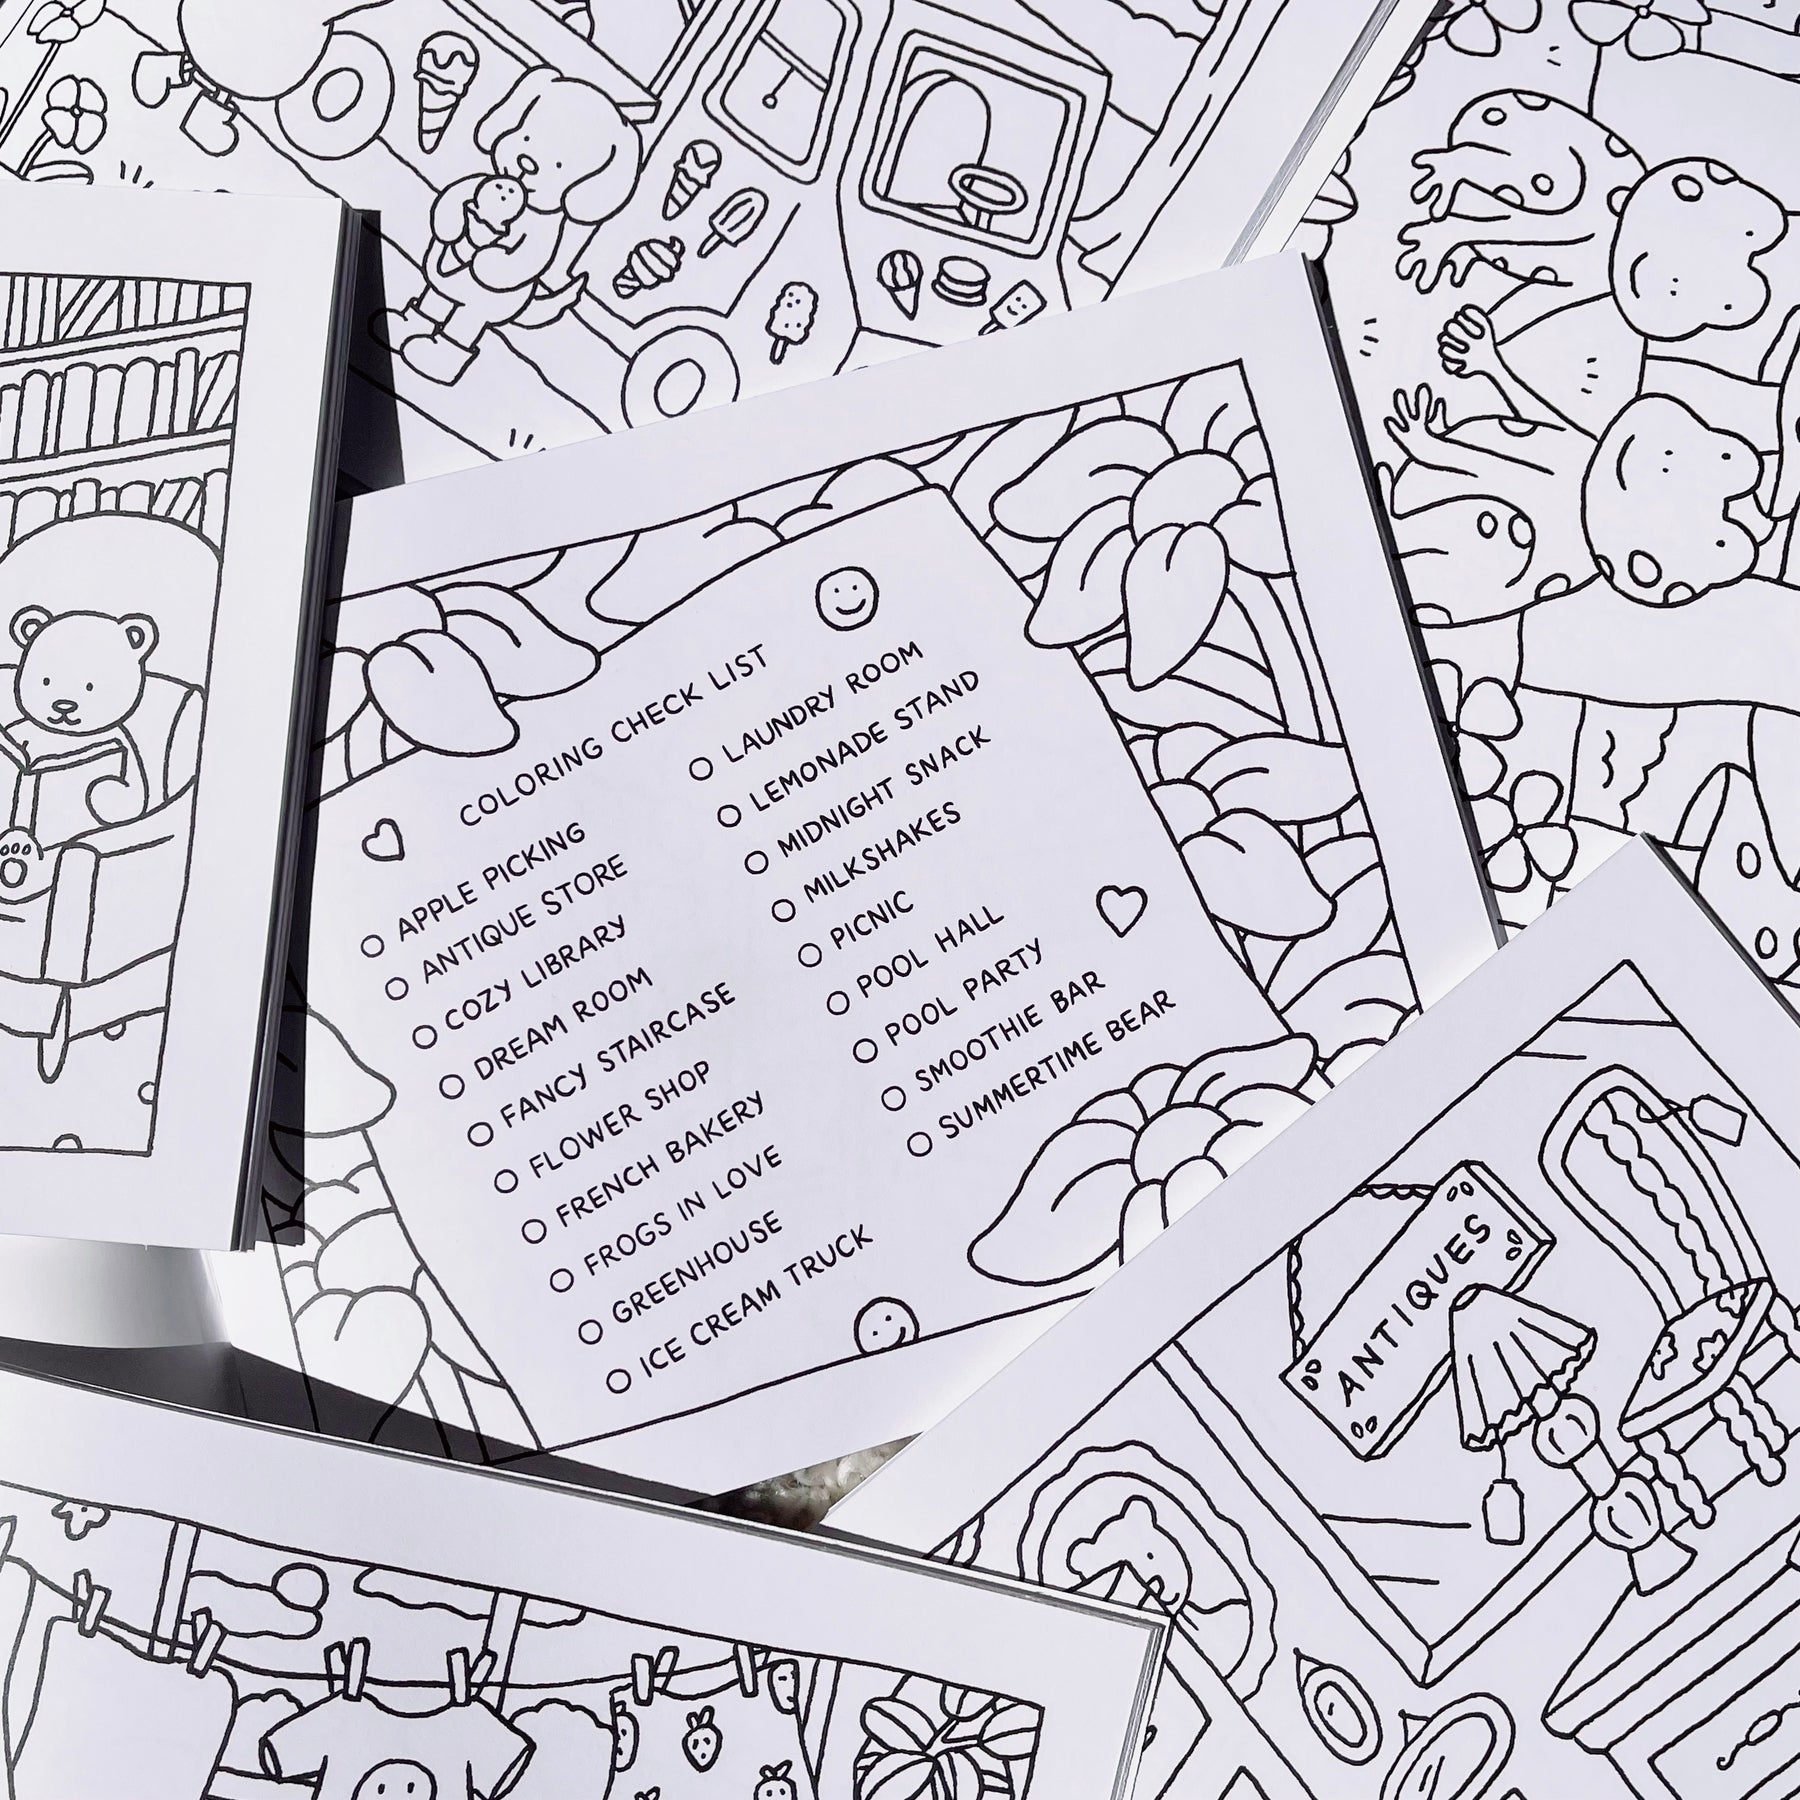 Bobbie Goods Colouring Book: 50+ One Sided Drawing JUMBO Bobby